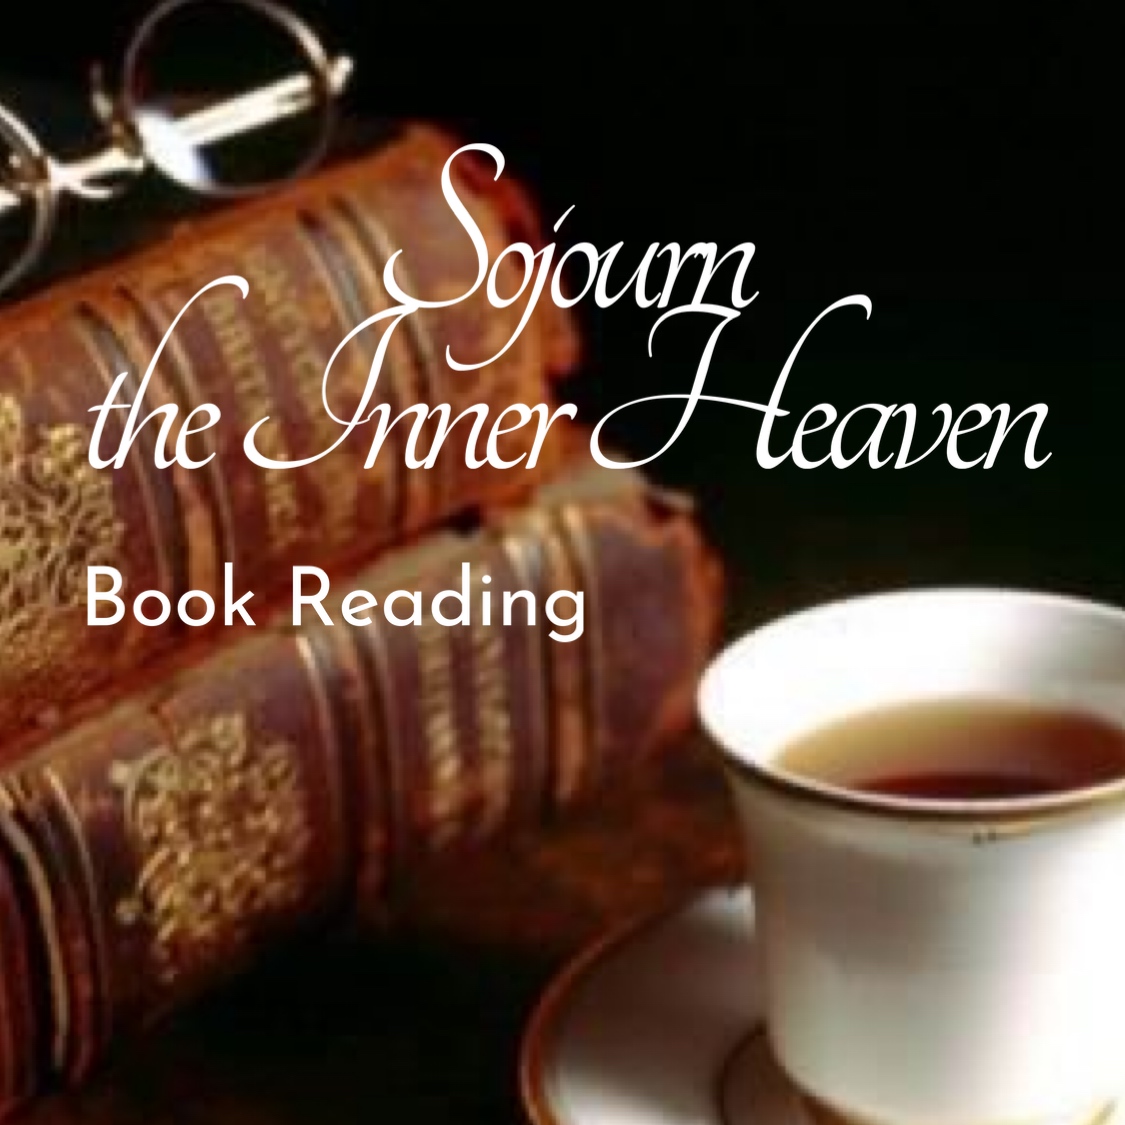 Video: 'Sojourn the Inner Heaven' Book Launch Reading